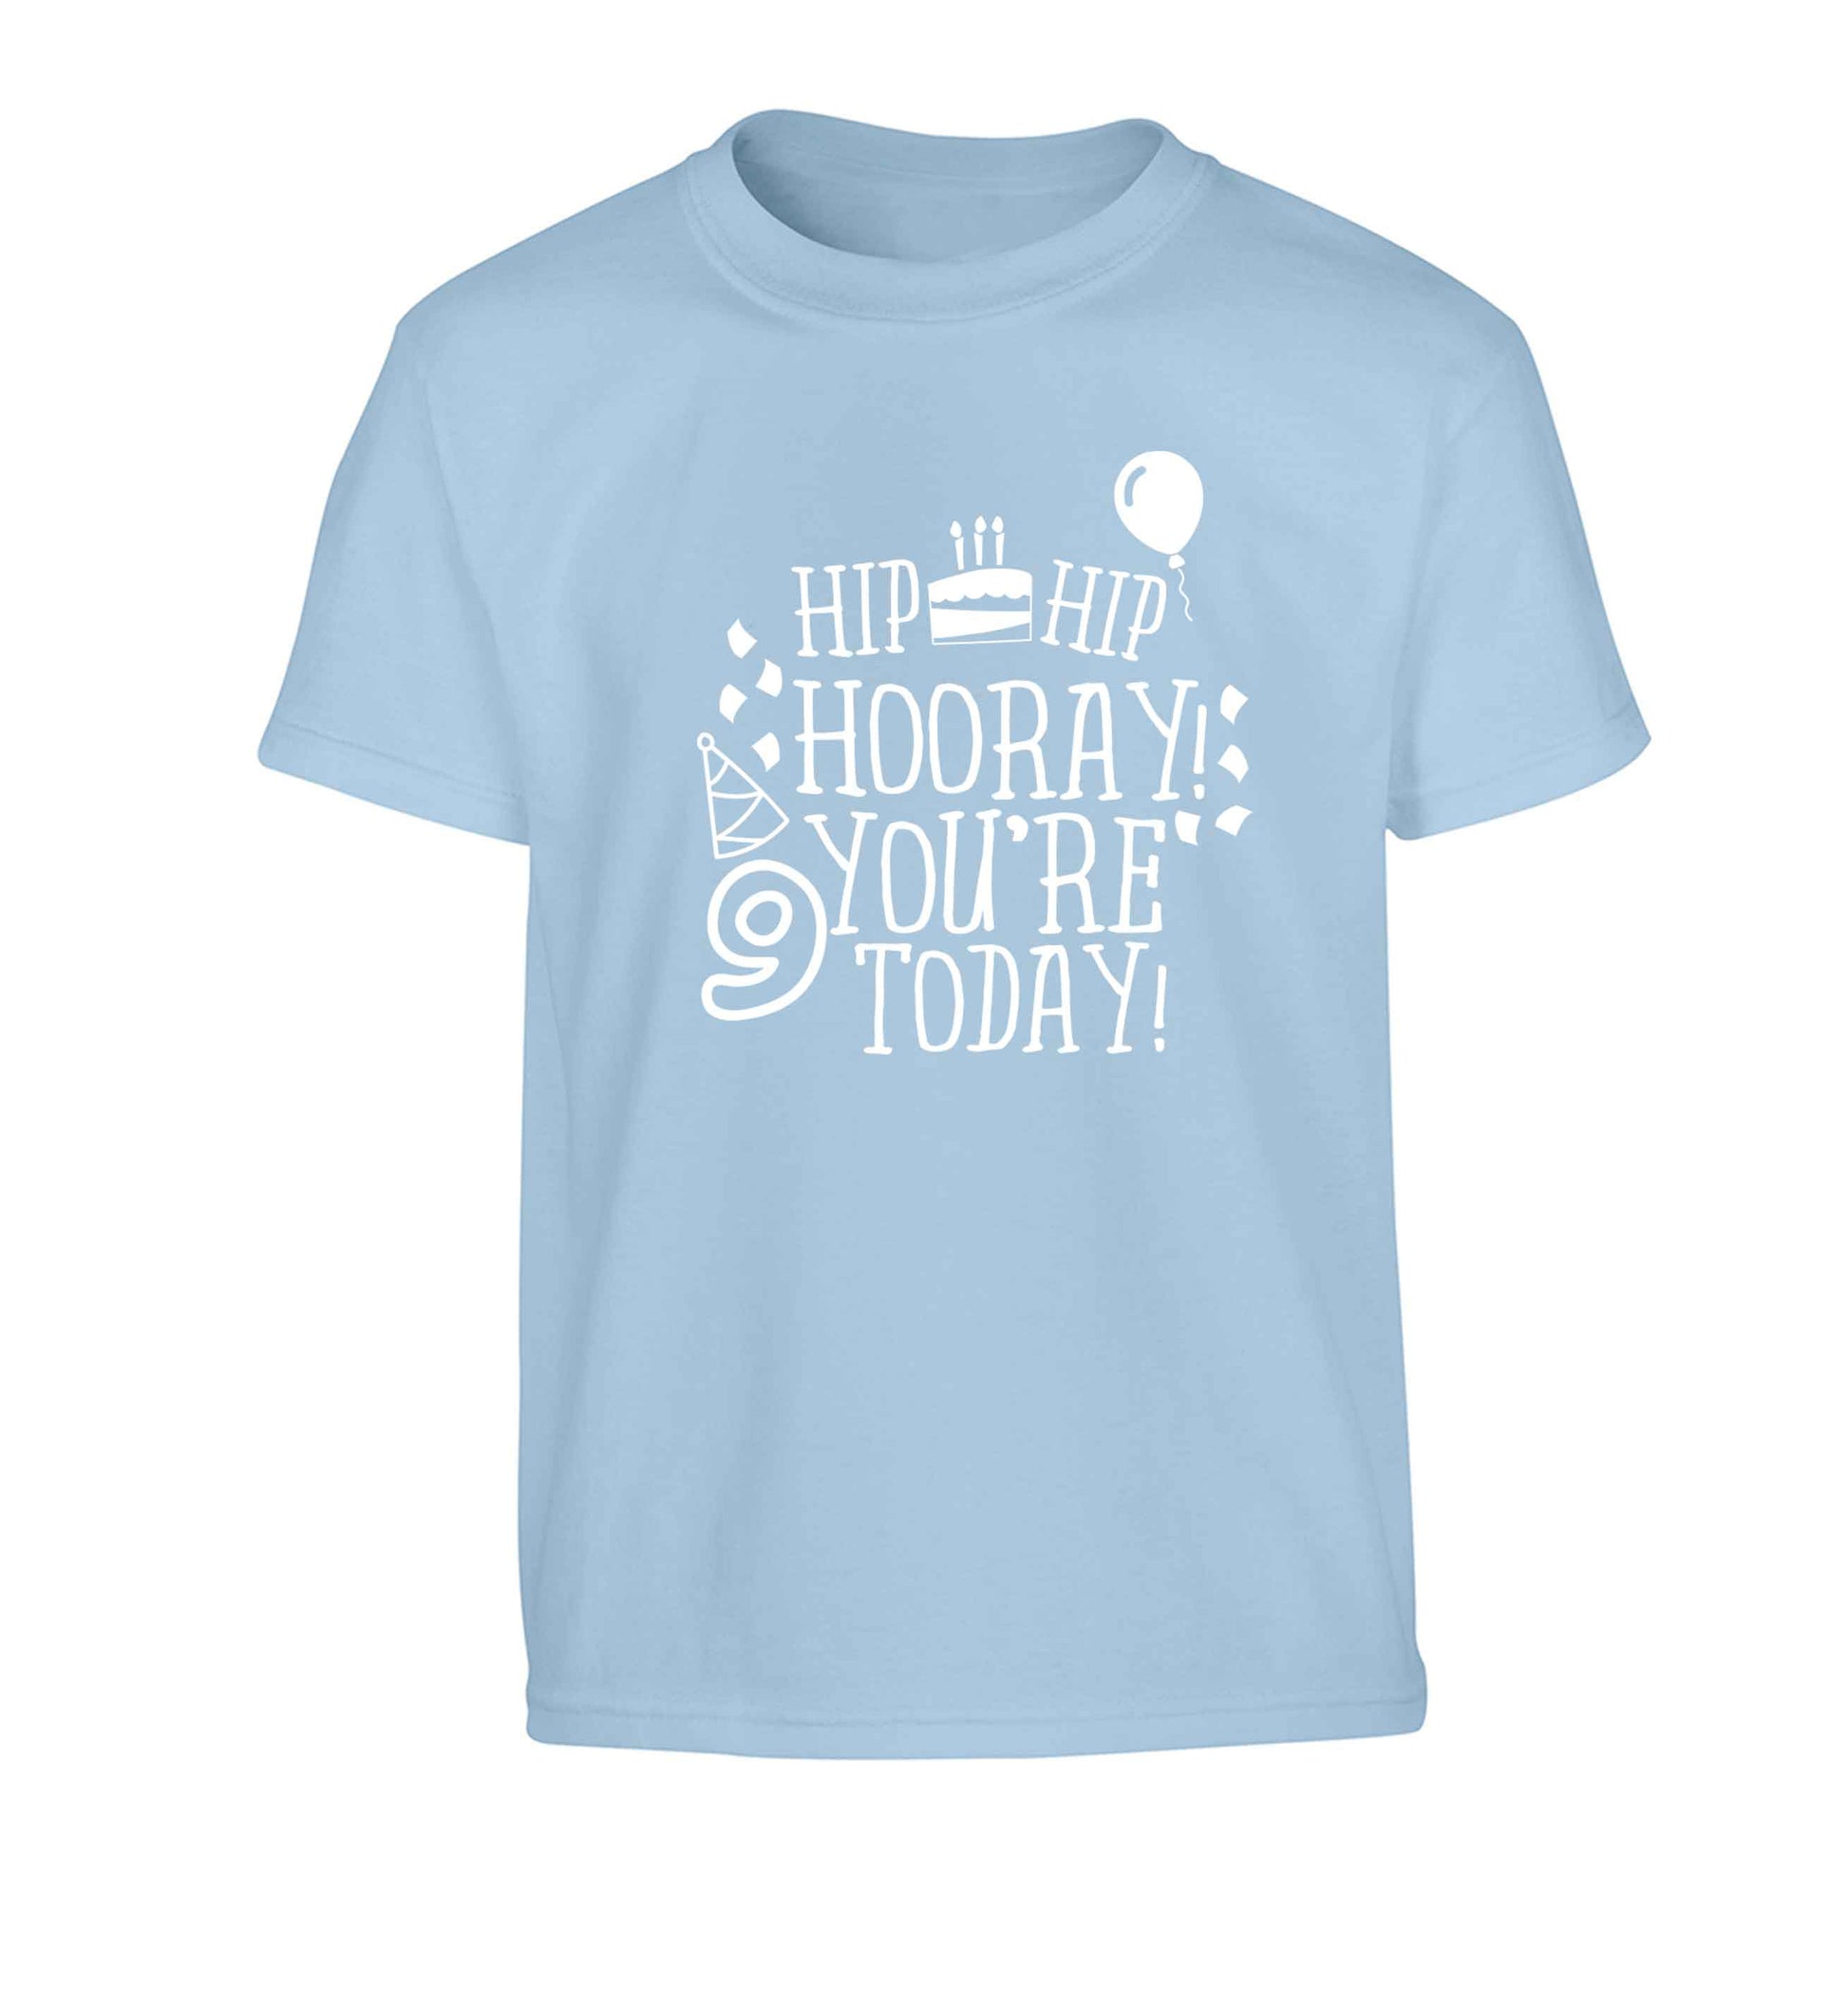 Hip hip hooray you're 9 today! Children's light blue Tshirt 12-13 Years